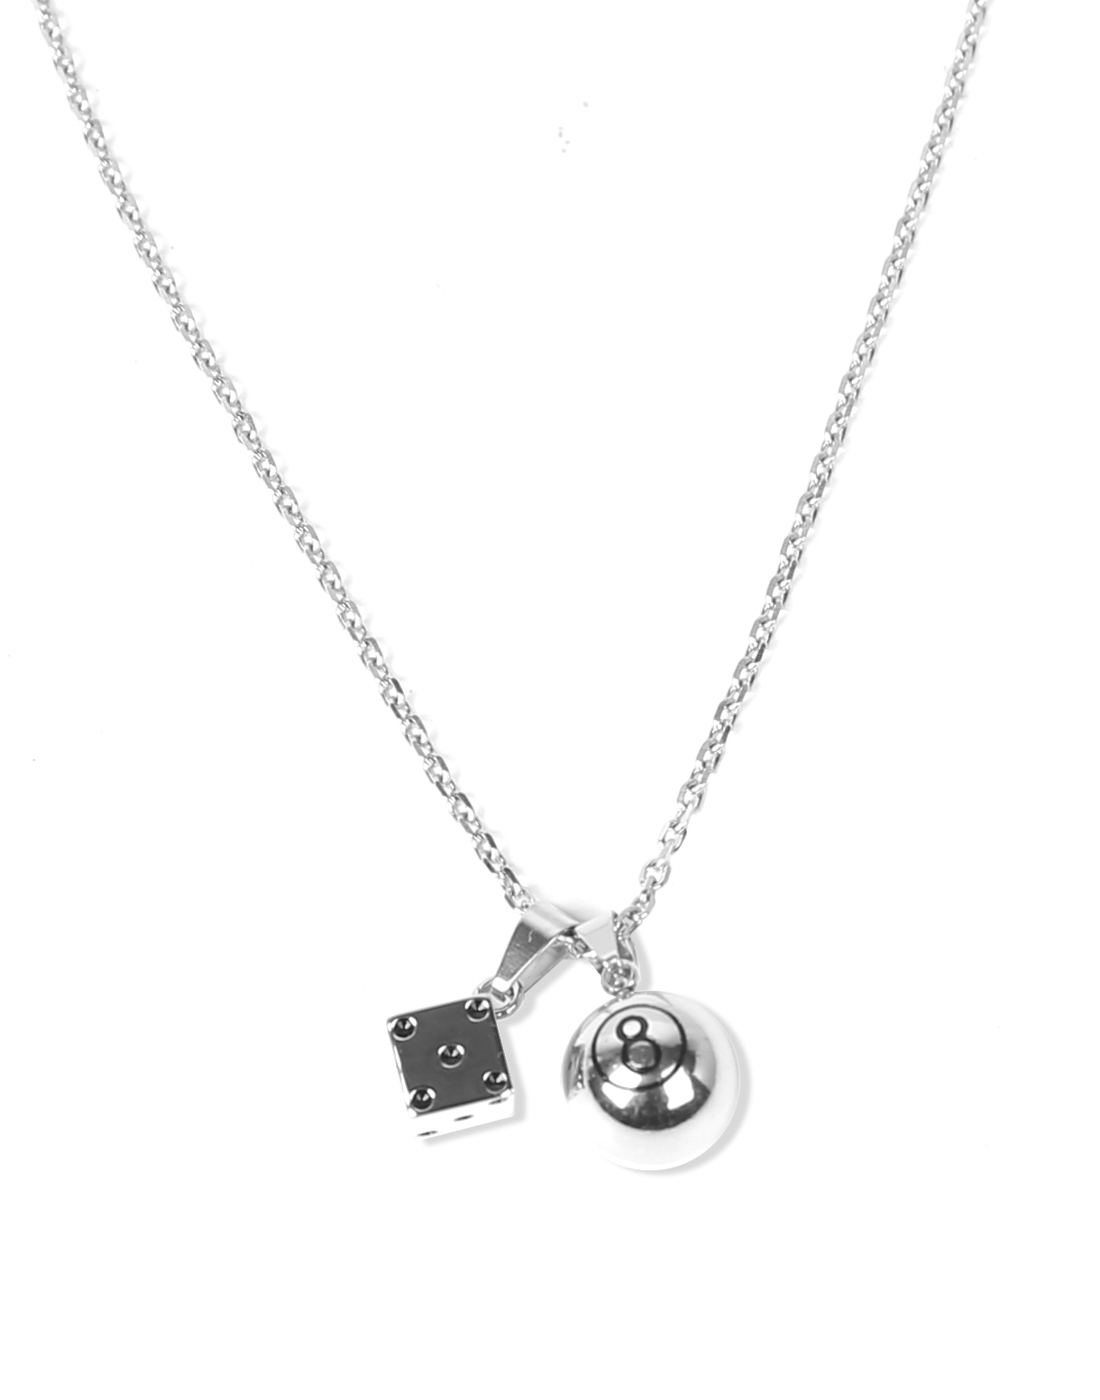 3way 8ball &amp; dice necklace